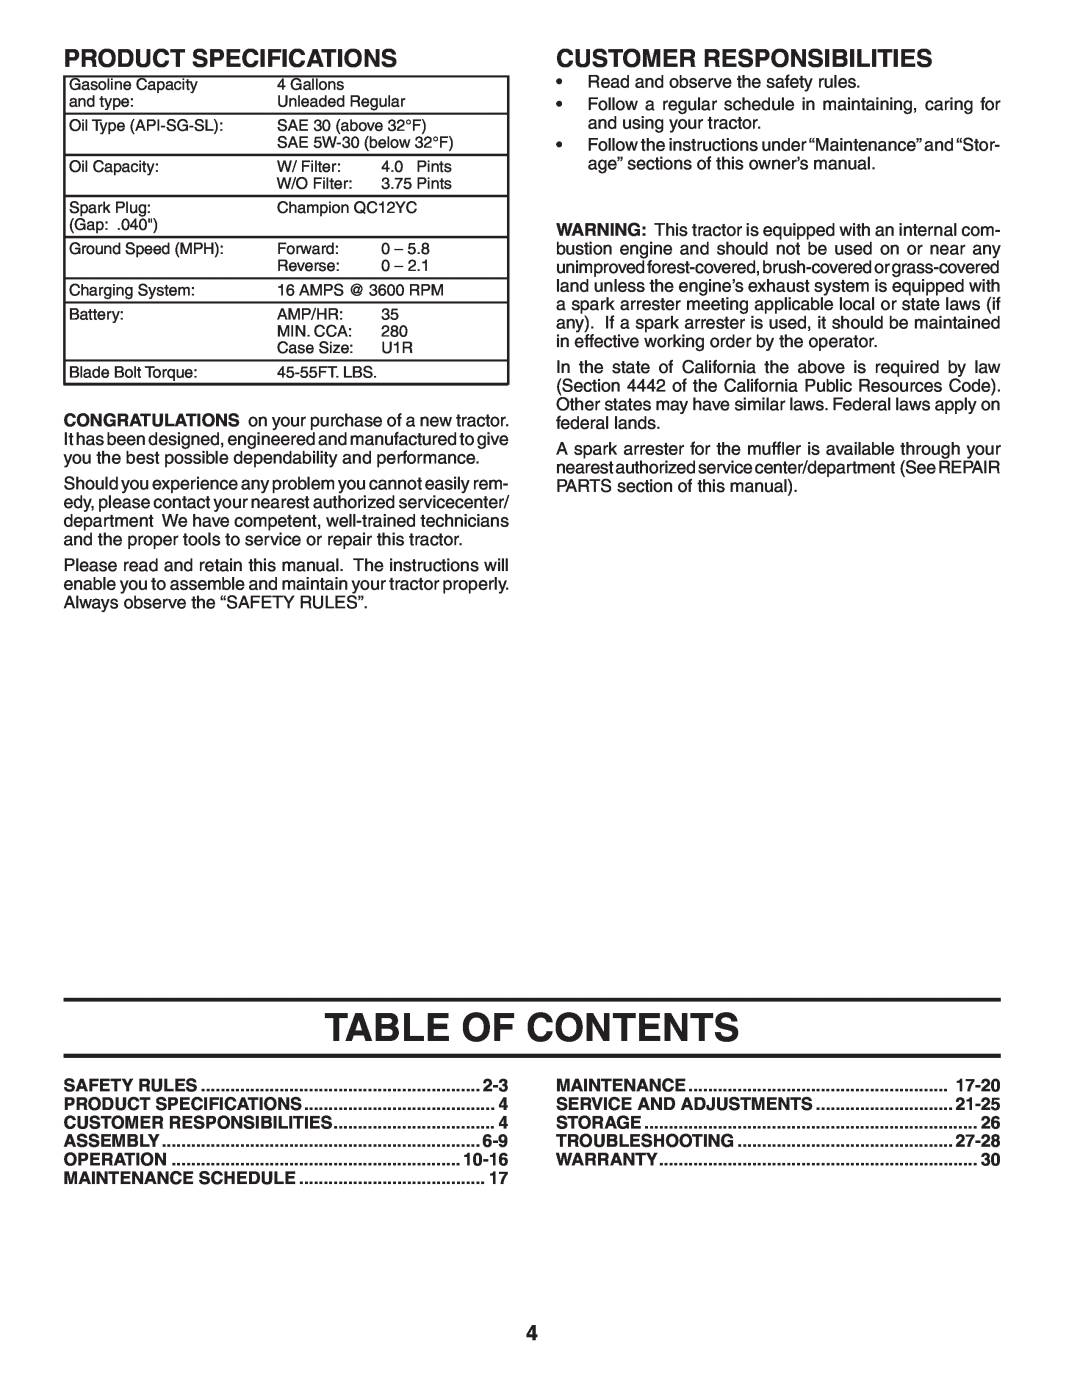 Poulan 405035 manual Table Of Contents, Product Specifications, Customer Responsibilities, 10-16, 17-20, 21-25, 27-28 